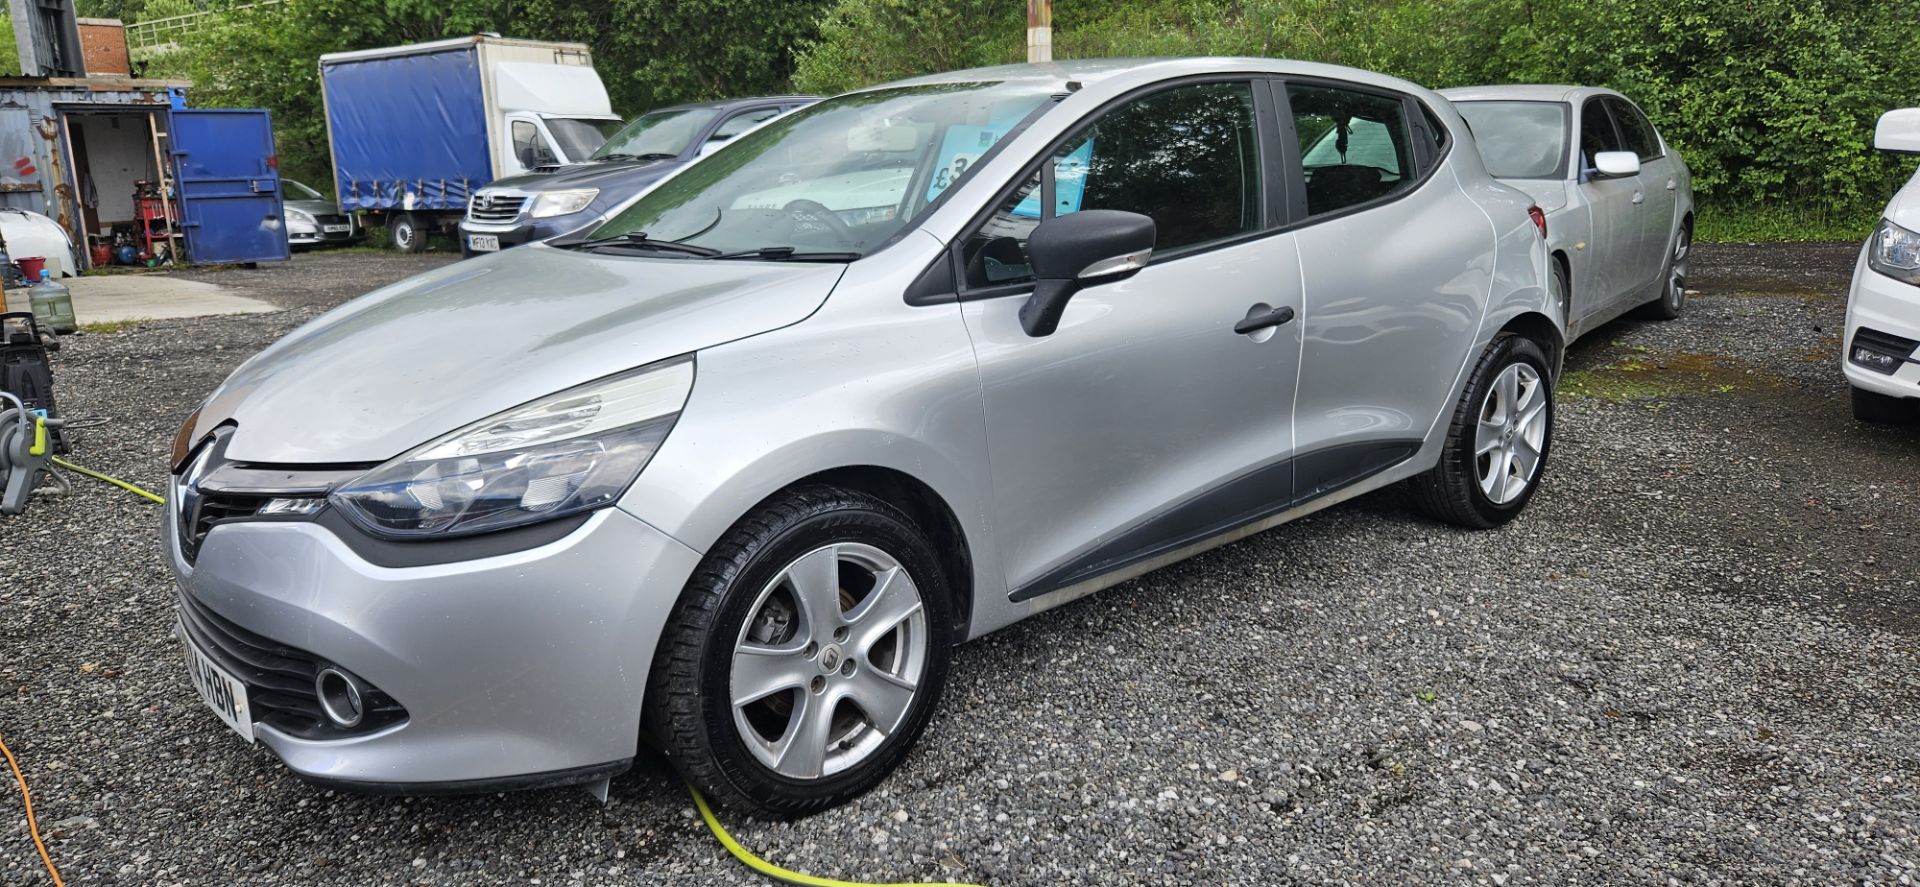 2014 RENAULT CLIO HATCHBACK - FULL SERVICE HISTORY - Image 4 of 7